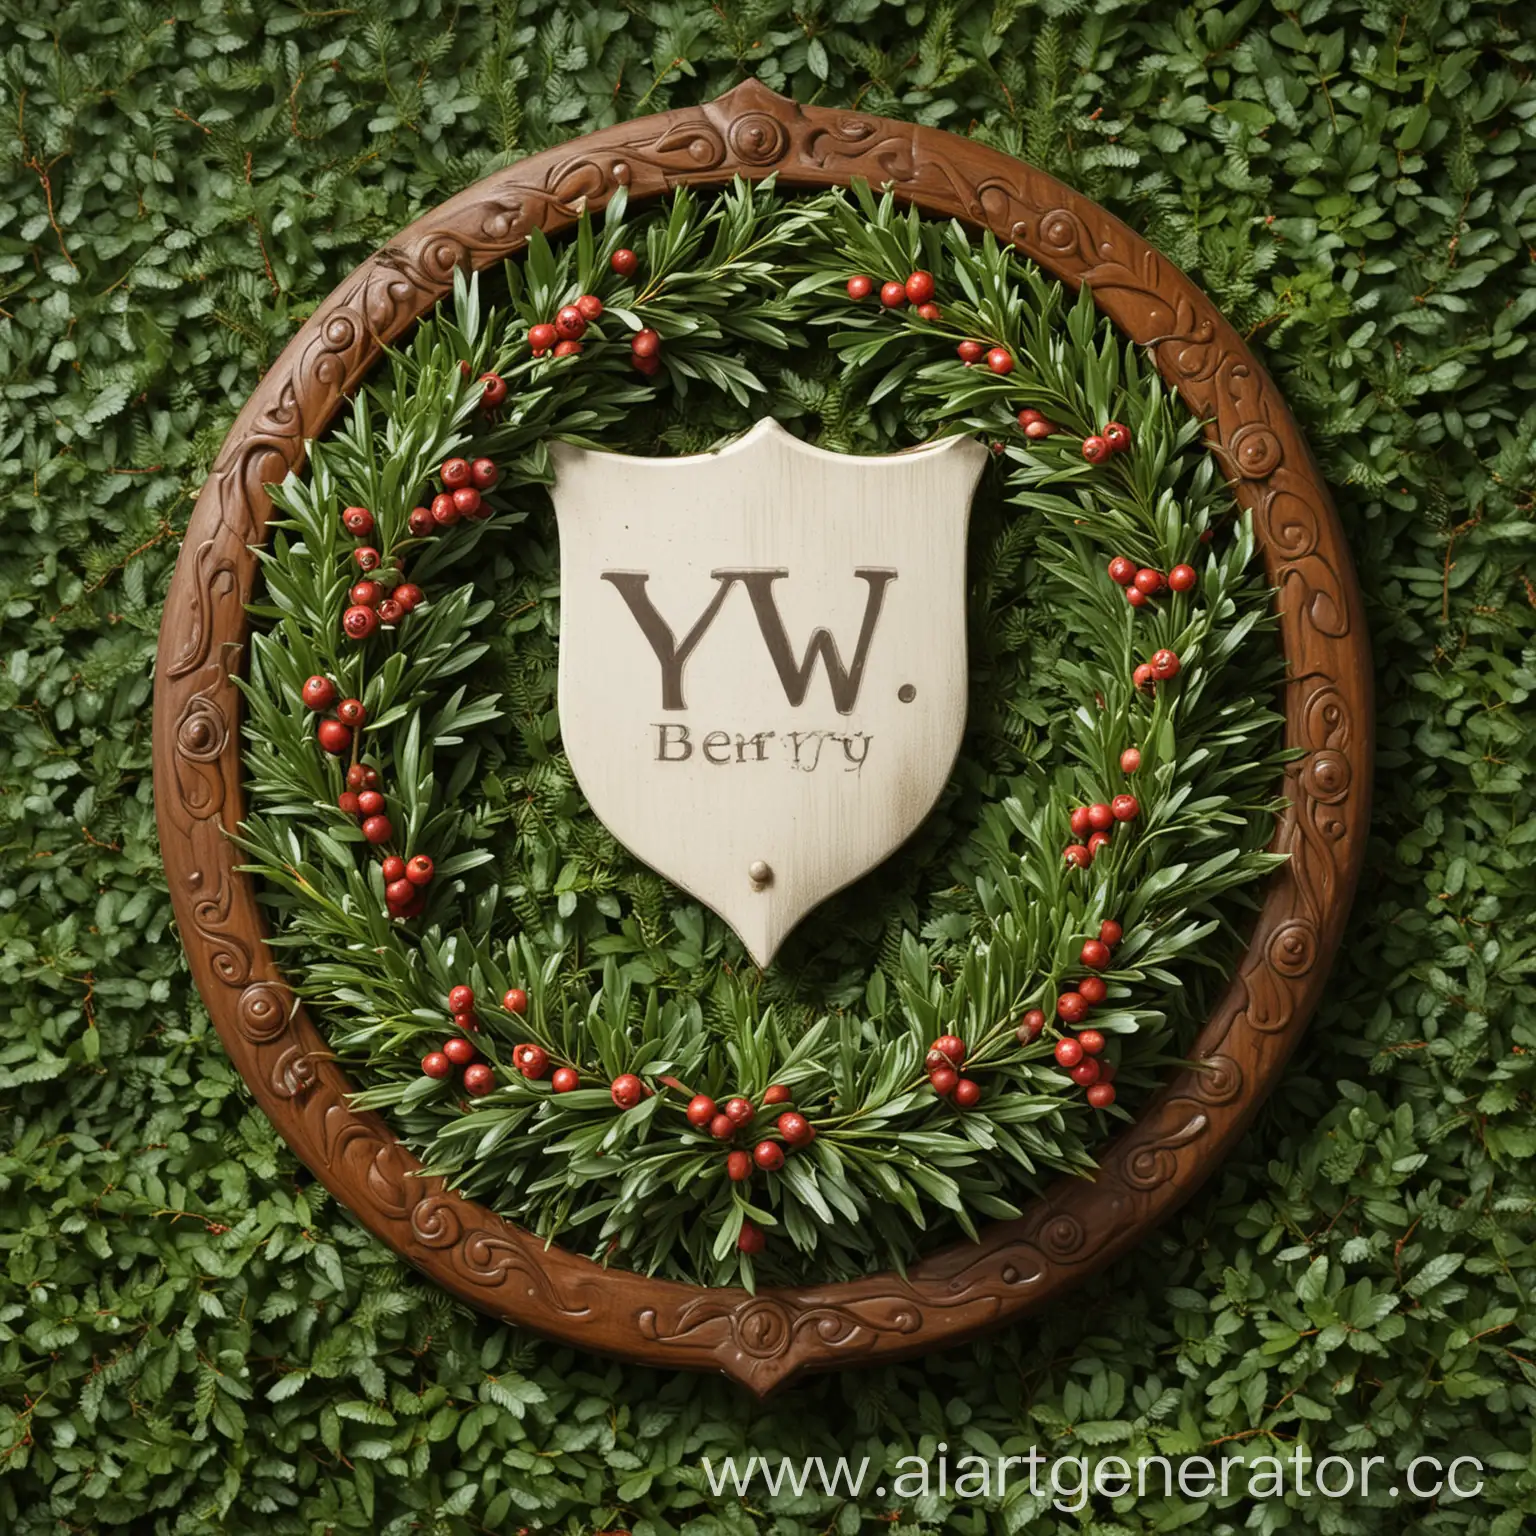 Yew-Berry-Shield-Symbolic-Yew-Bush-with-Berries-in-Green-Foliage